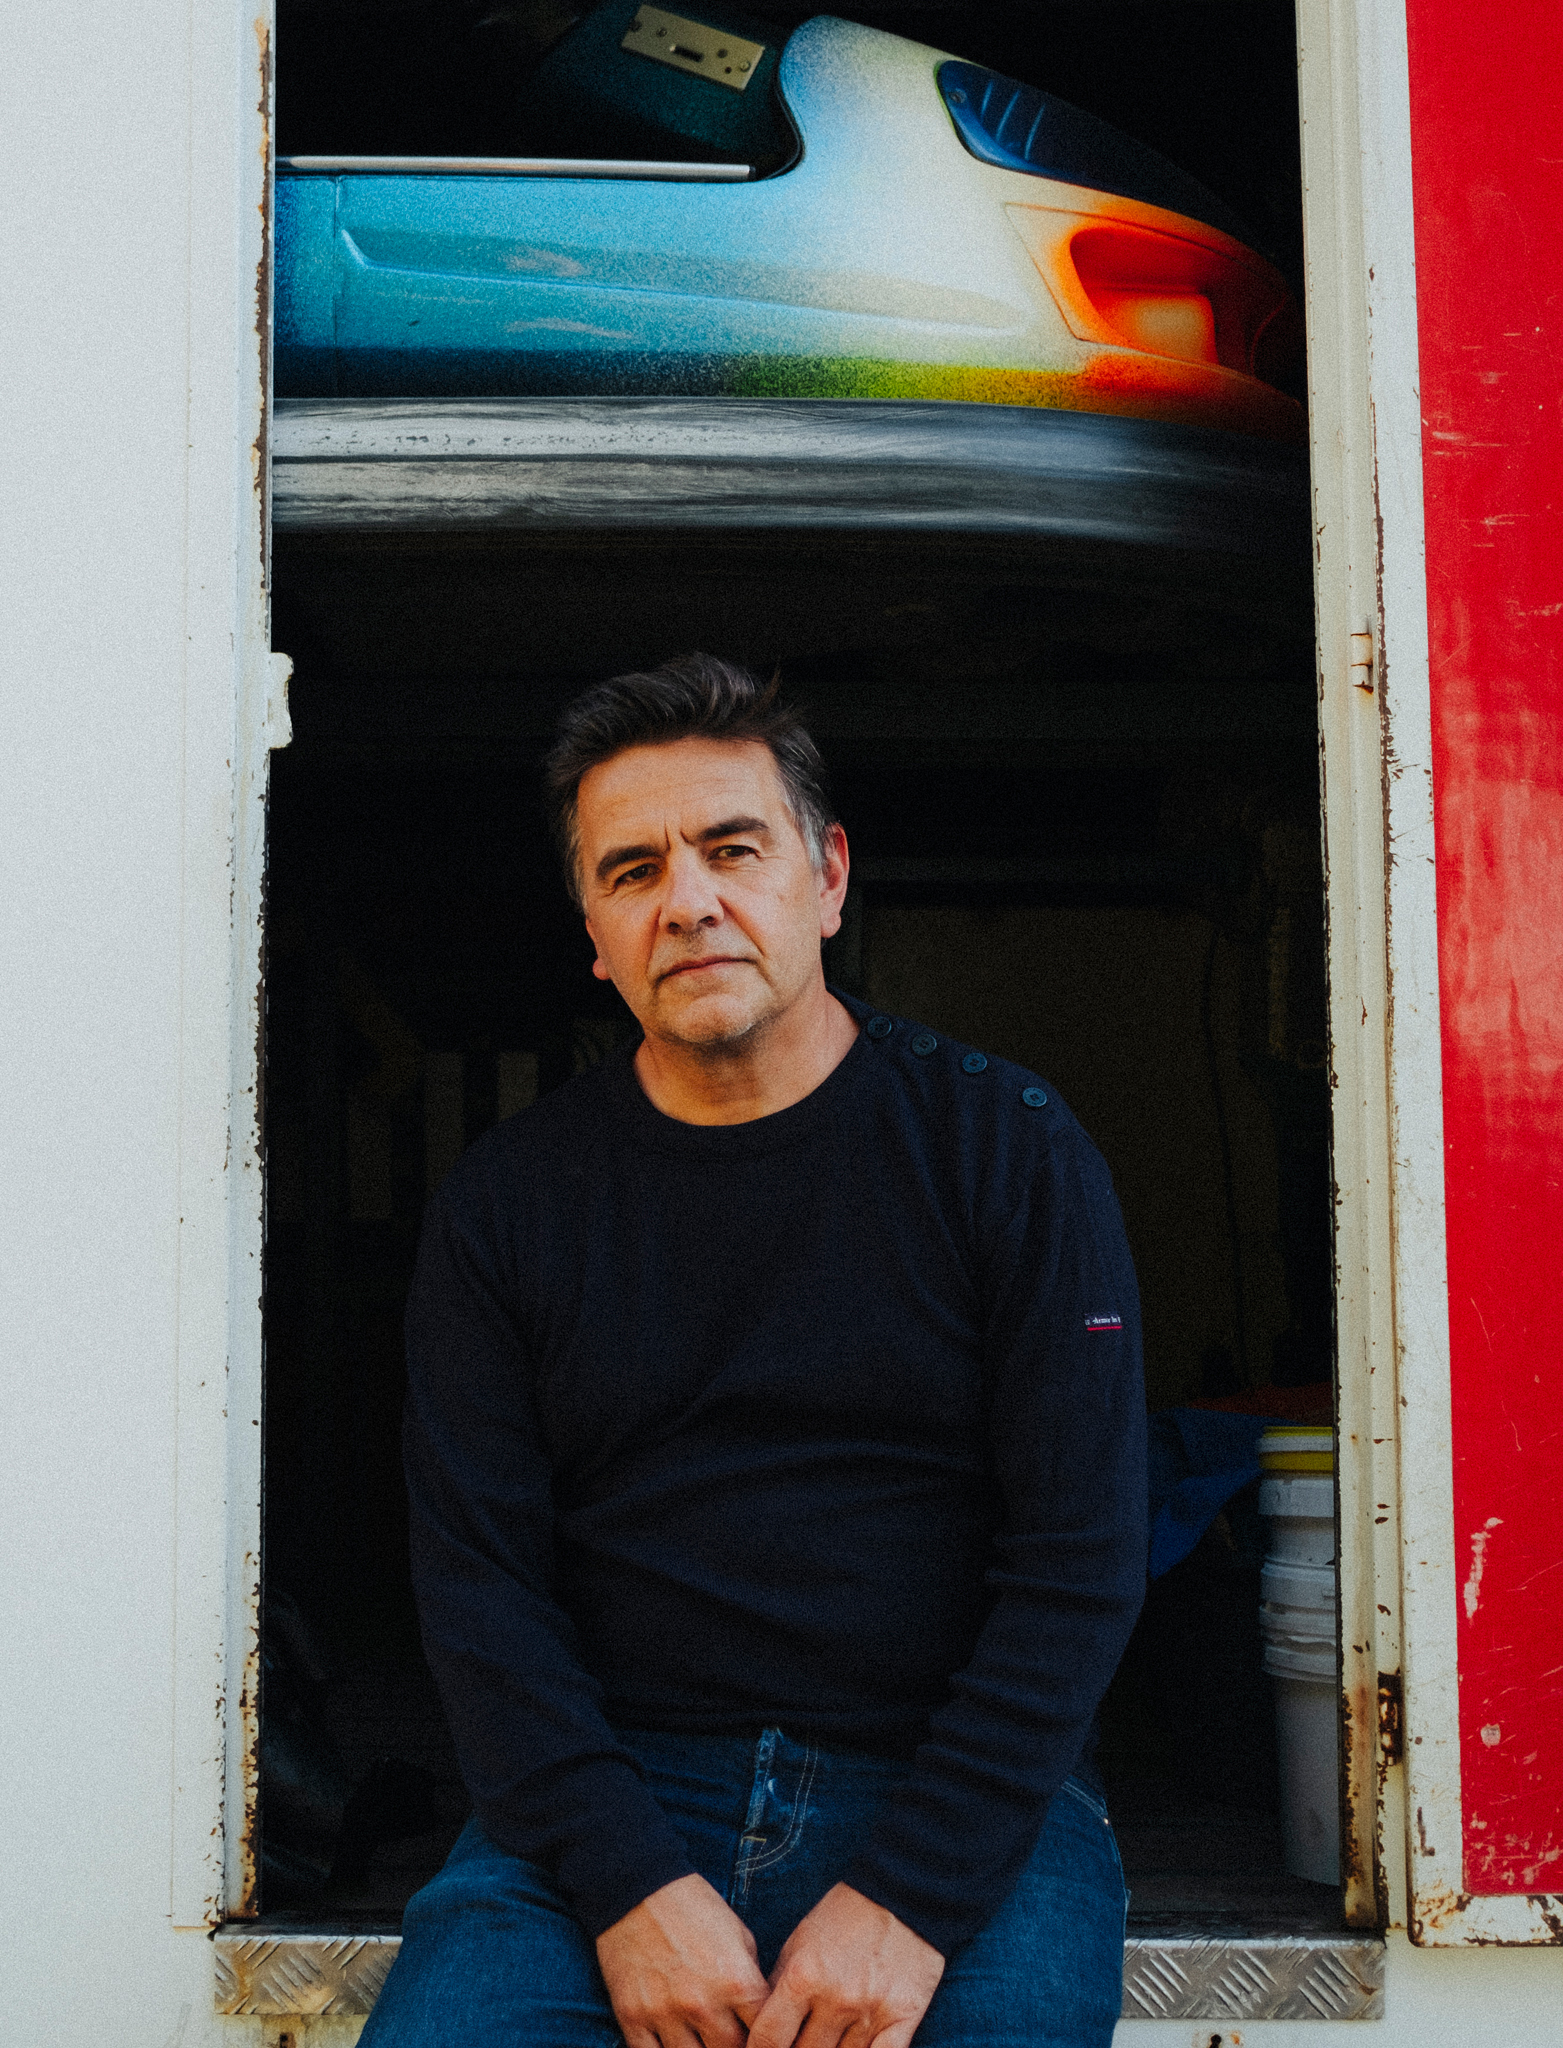 For Laurent Garnier, Savouring Life Means Slowing Down